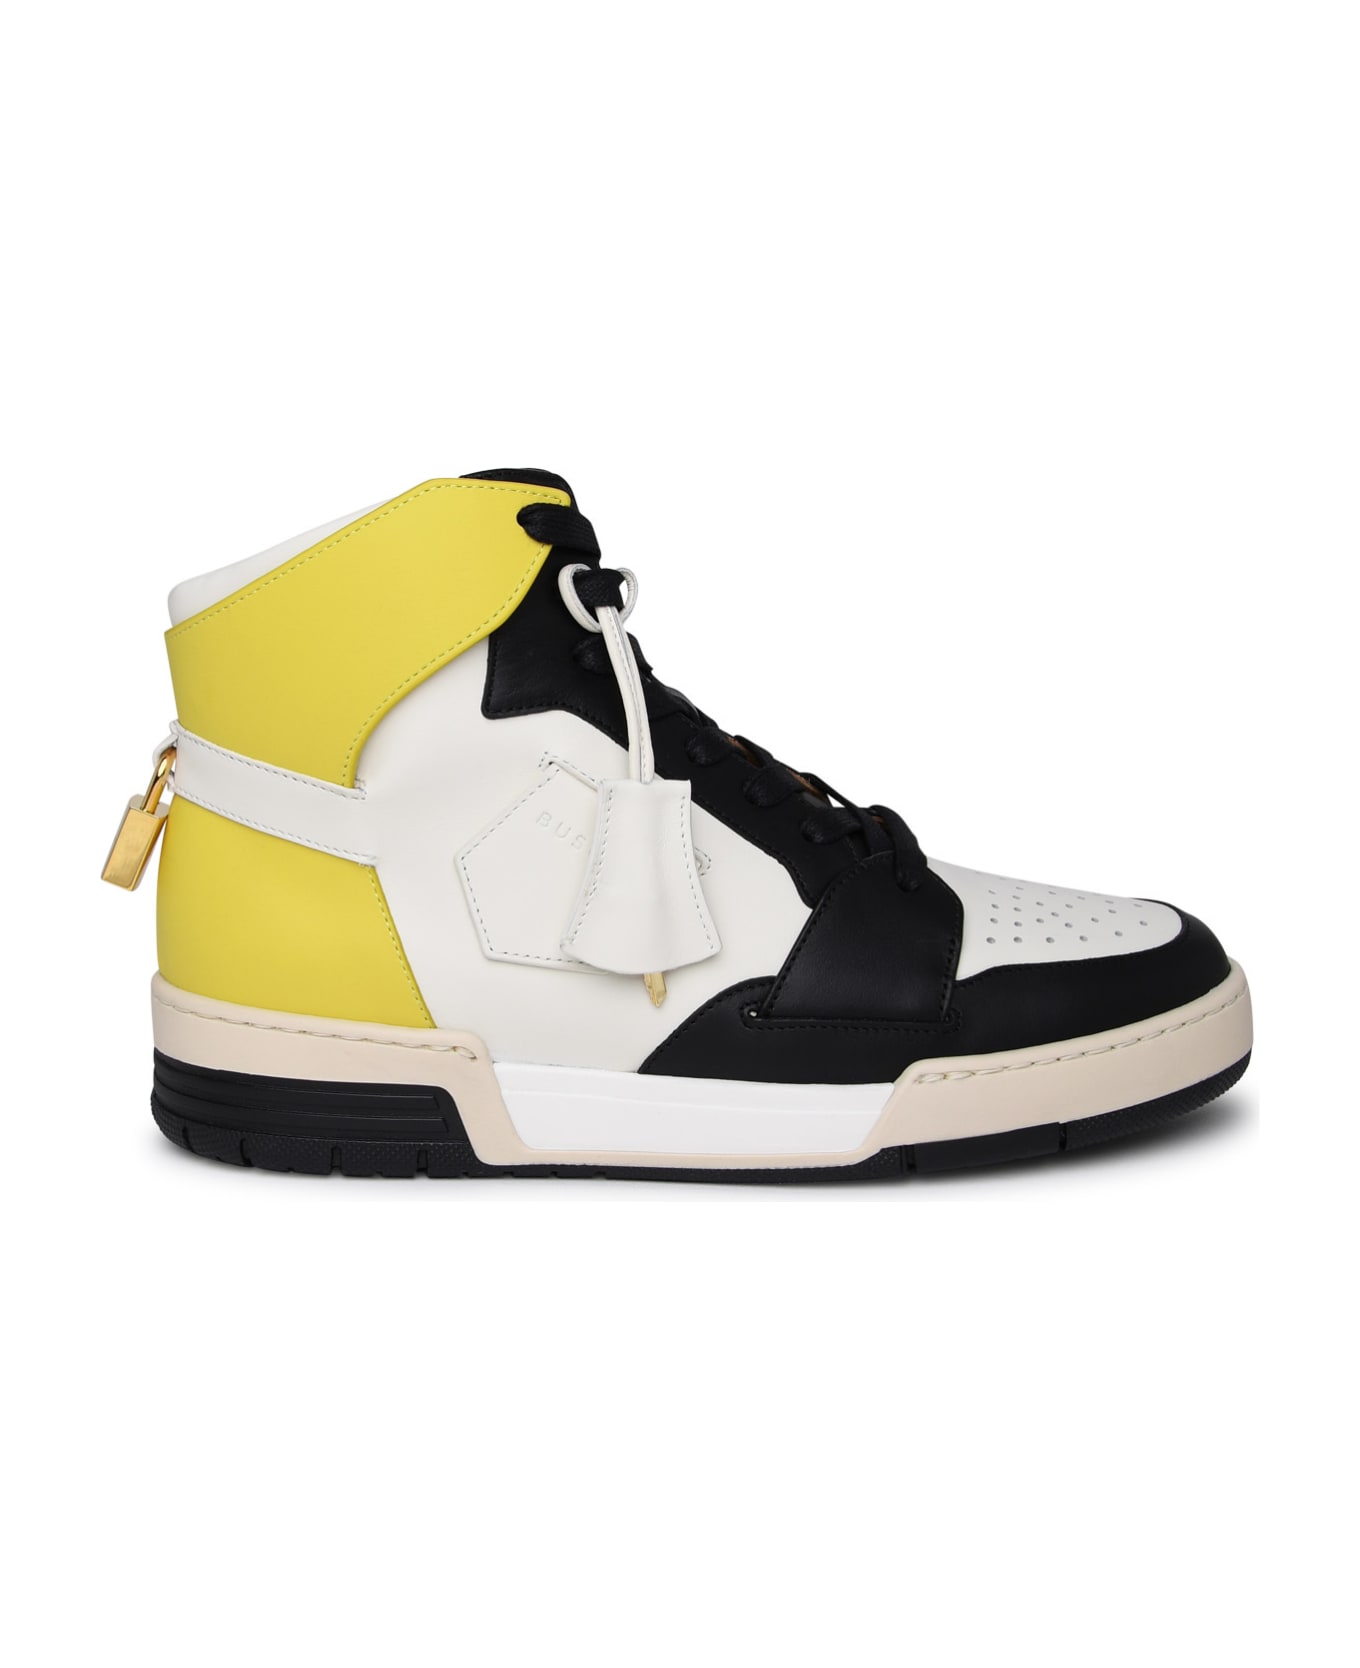 Buscemi 'air Jon' White And Yellow Leather Sneakers - White スニーカー